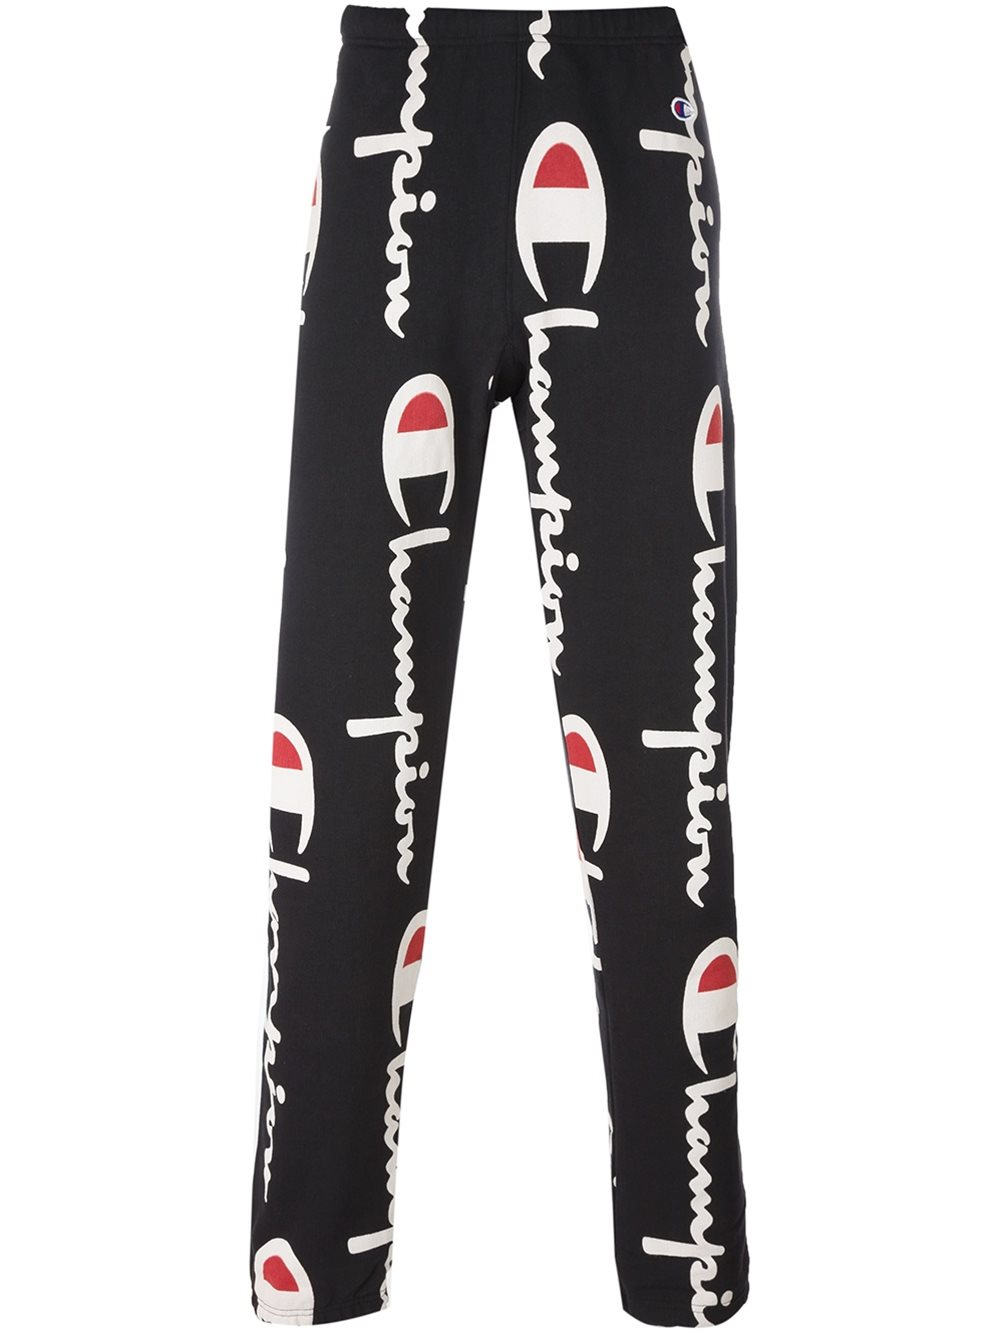 Champion Cotton All Over Logo Print Sweatpants in Black for Men - Lyst